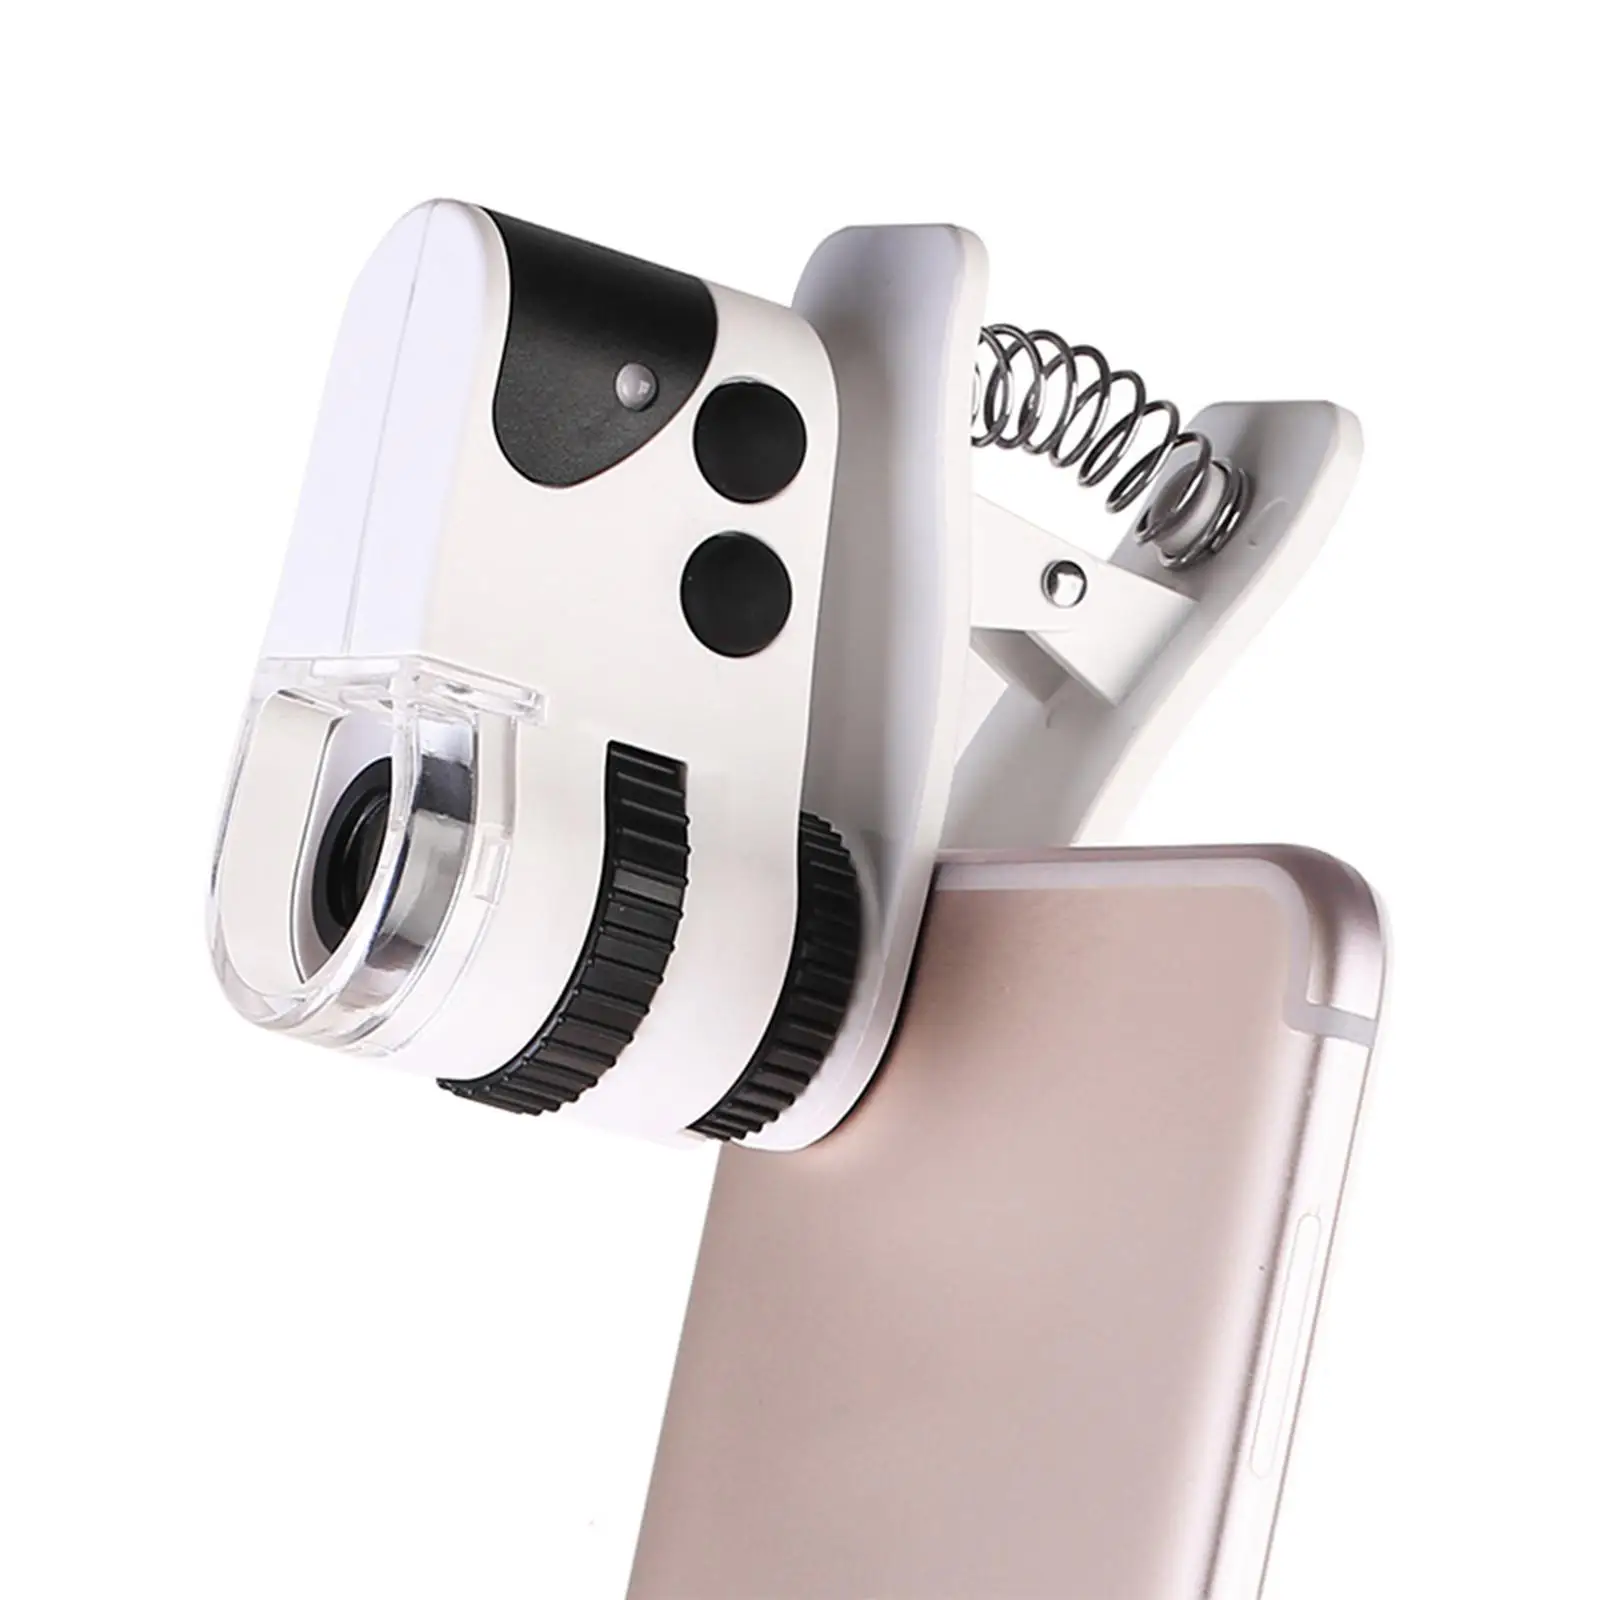 Phone Clip Microscope Adjustable Focusing with LED Light Universal Clip Magnifying Glass for Universal Smart Phones and Tablet